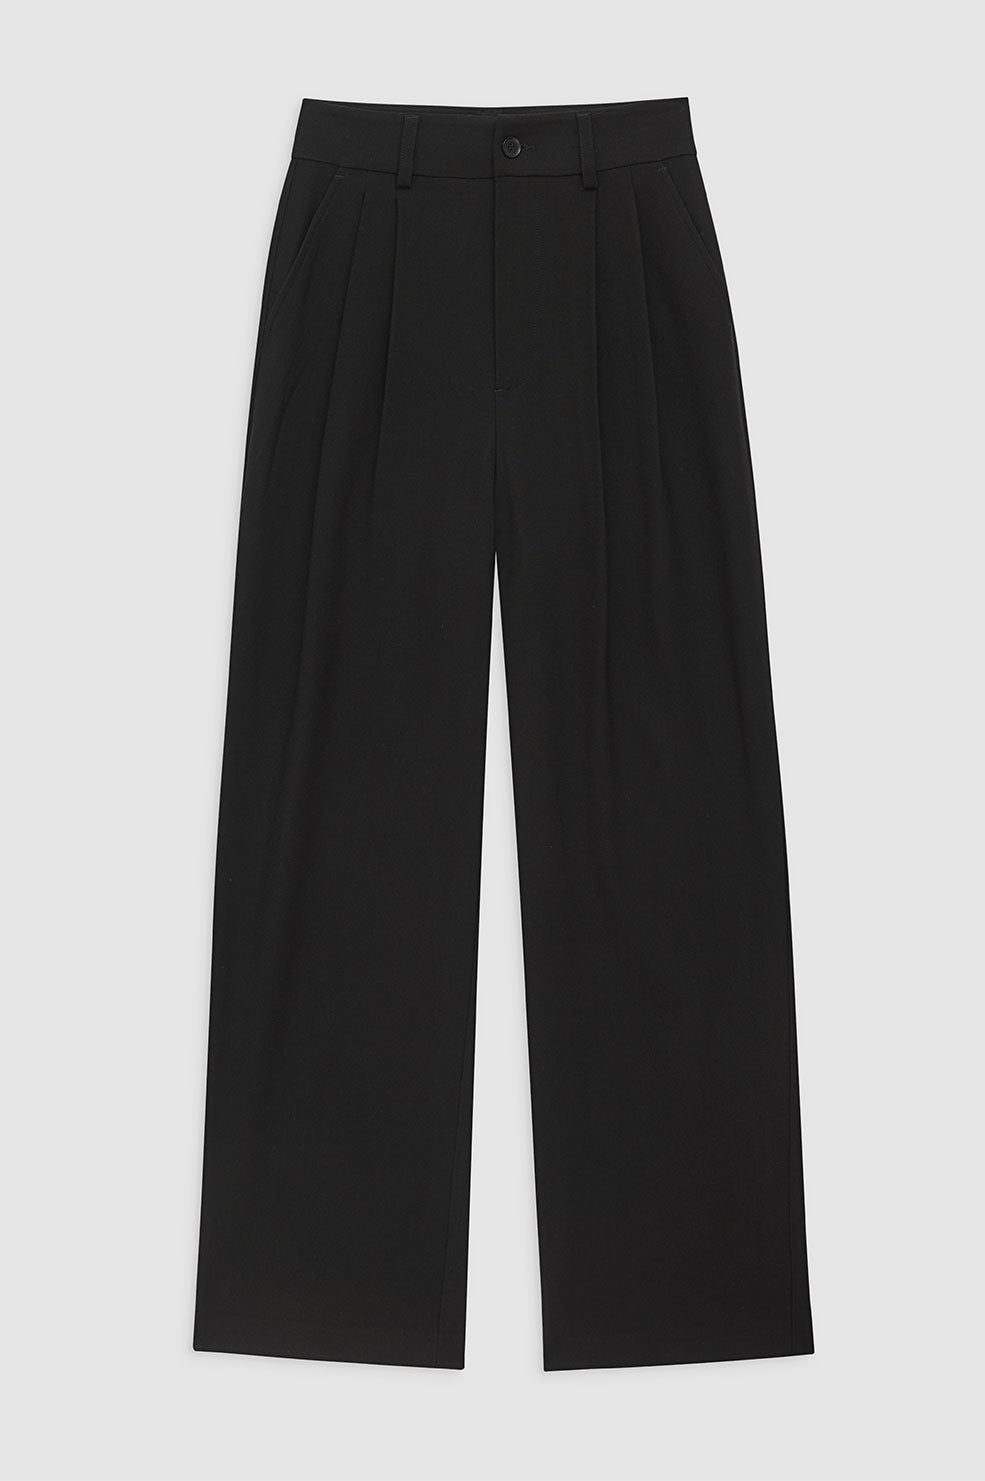 Carrie Pant in Black Twill by Anine Bing